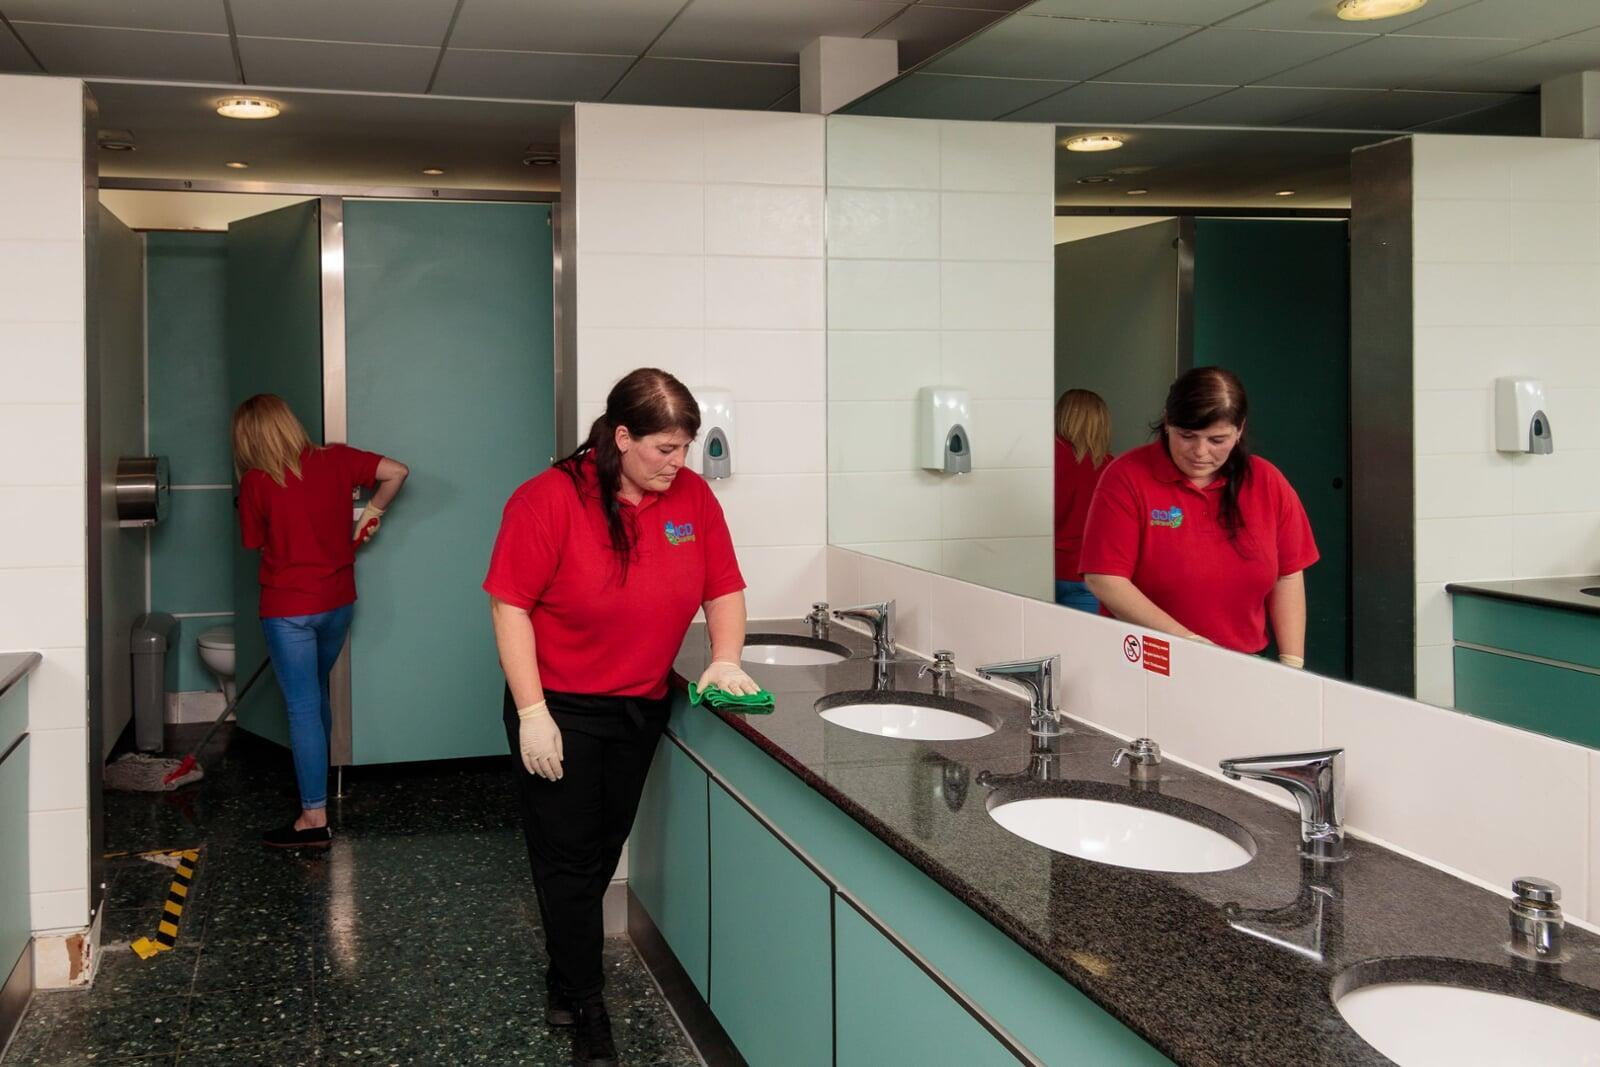 JCD Cleaning Services Rejects Unsubstantiated No Win/No Fee Claims as they Experience Continued Growth